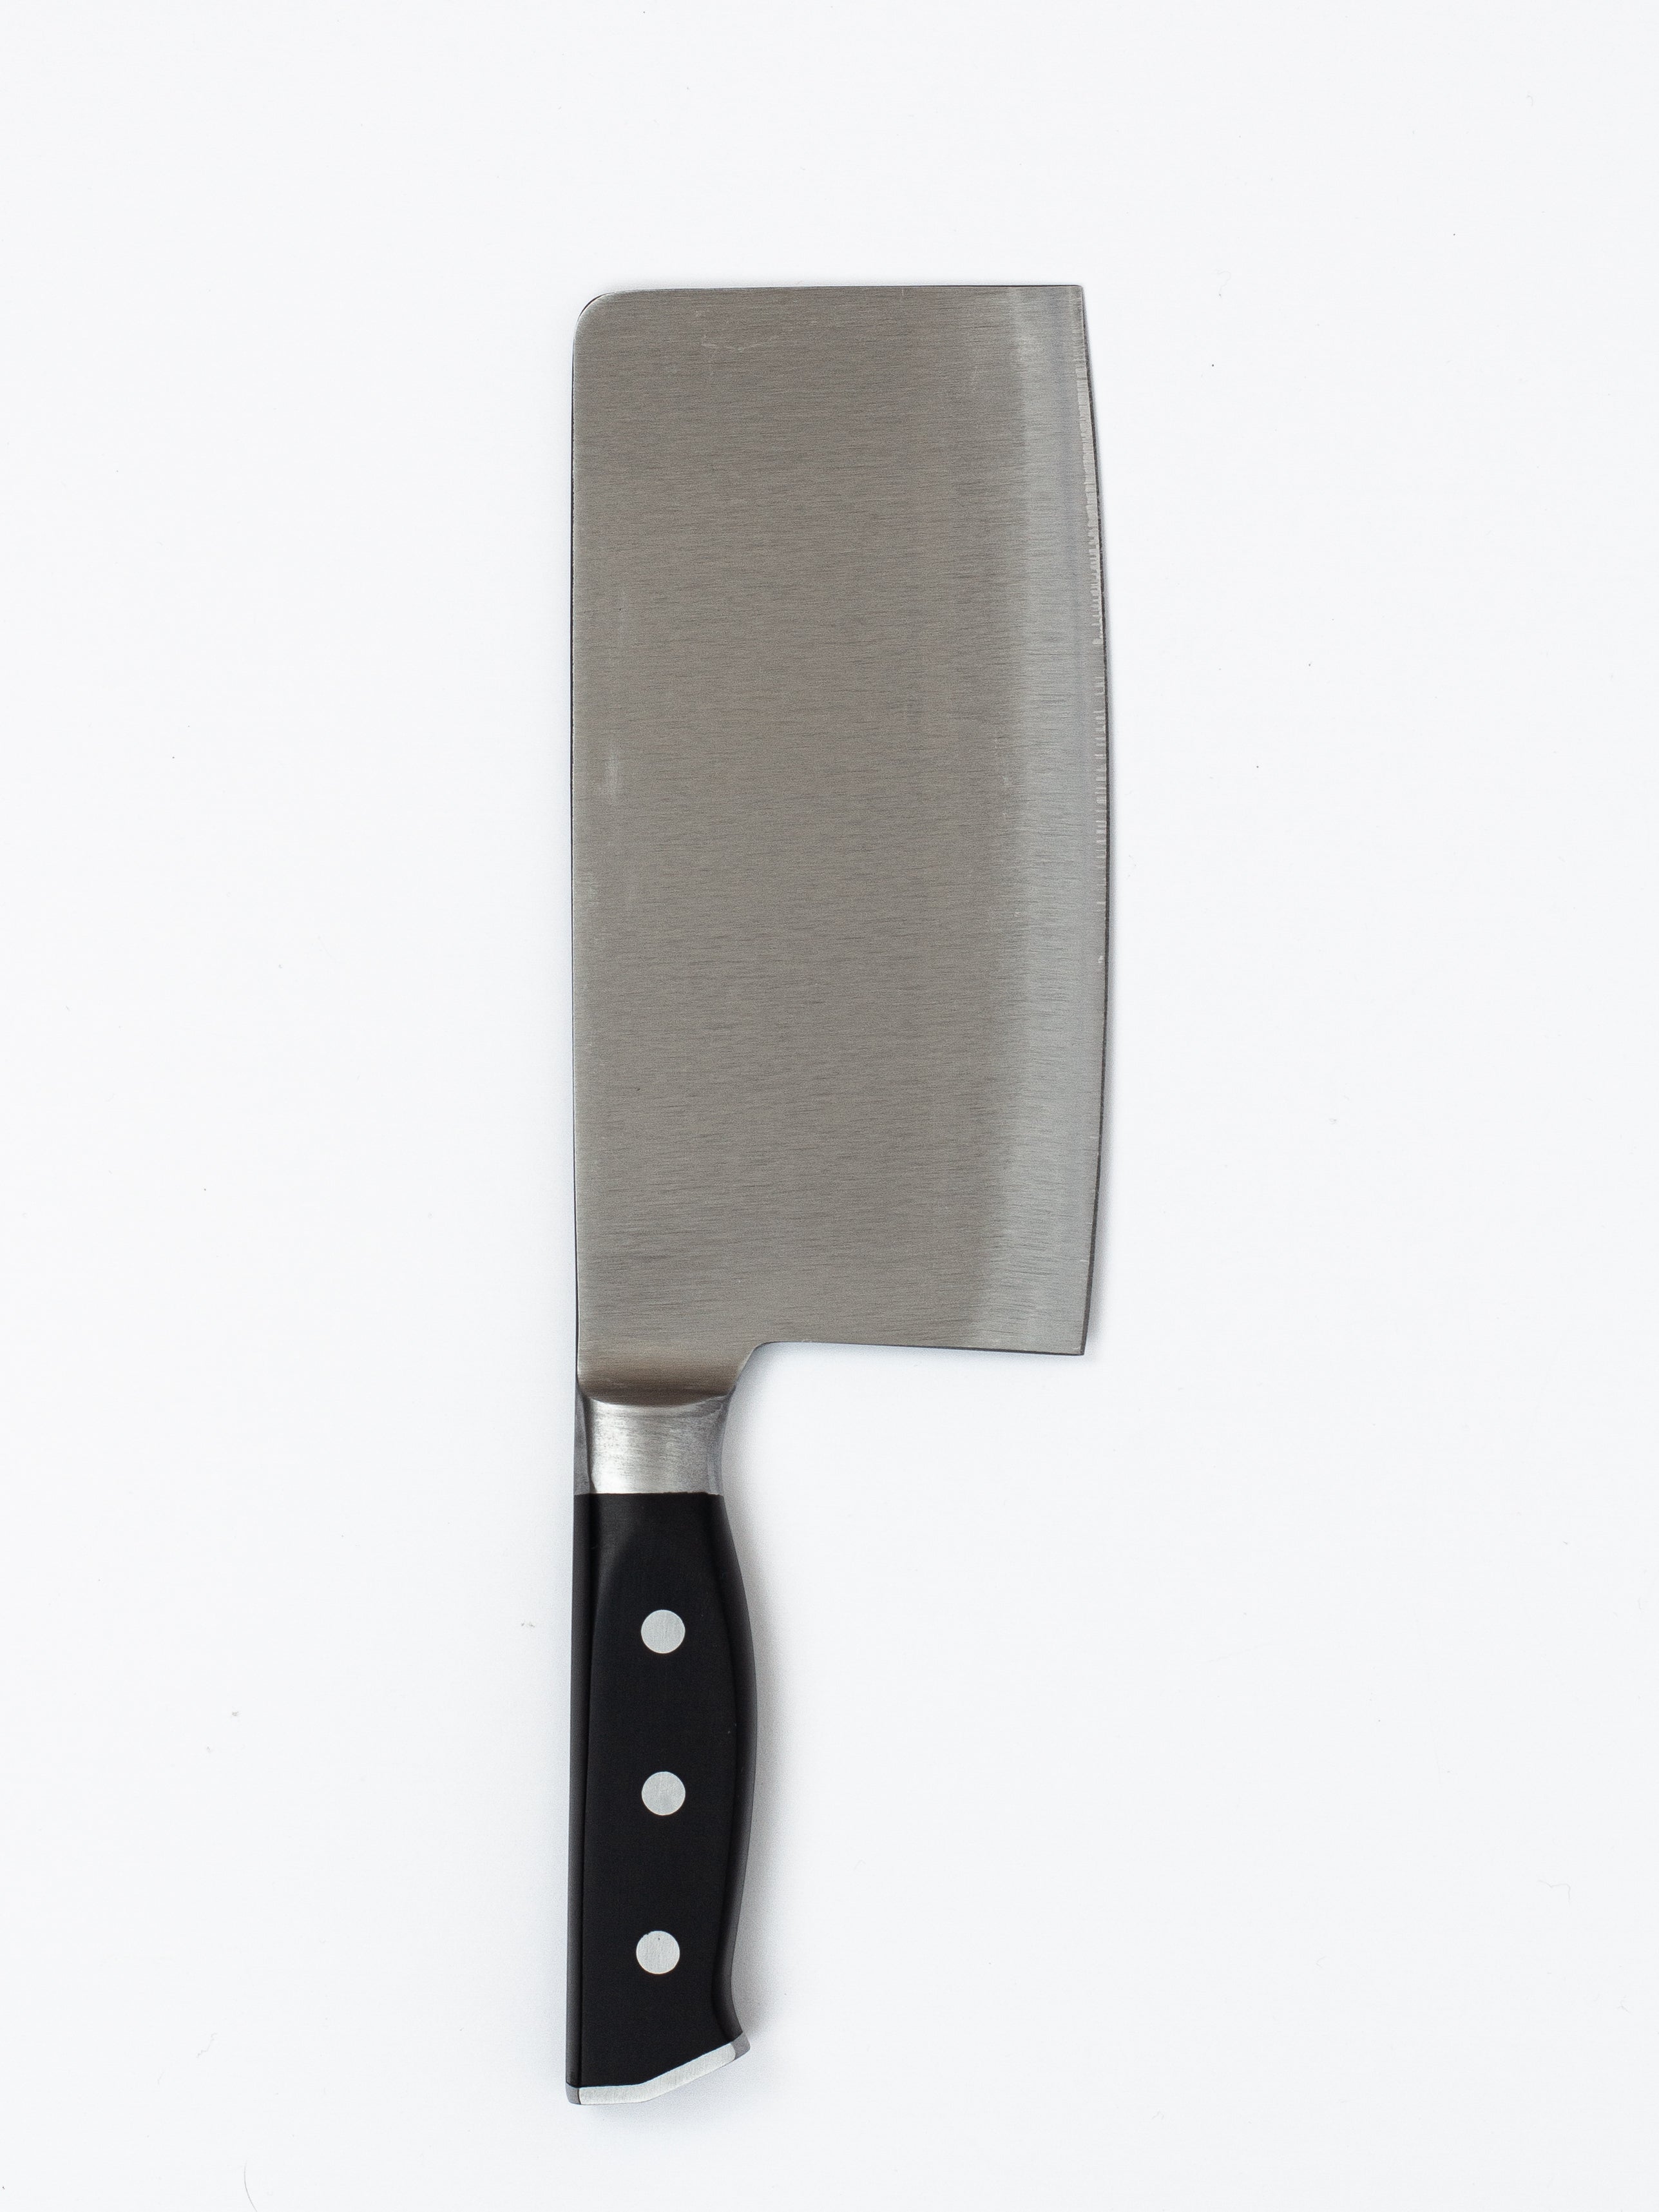 Maestro Wu Chinese Meat Cleaver - Stainless steel, hardness RC 58